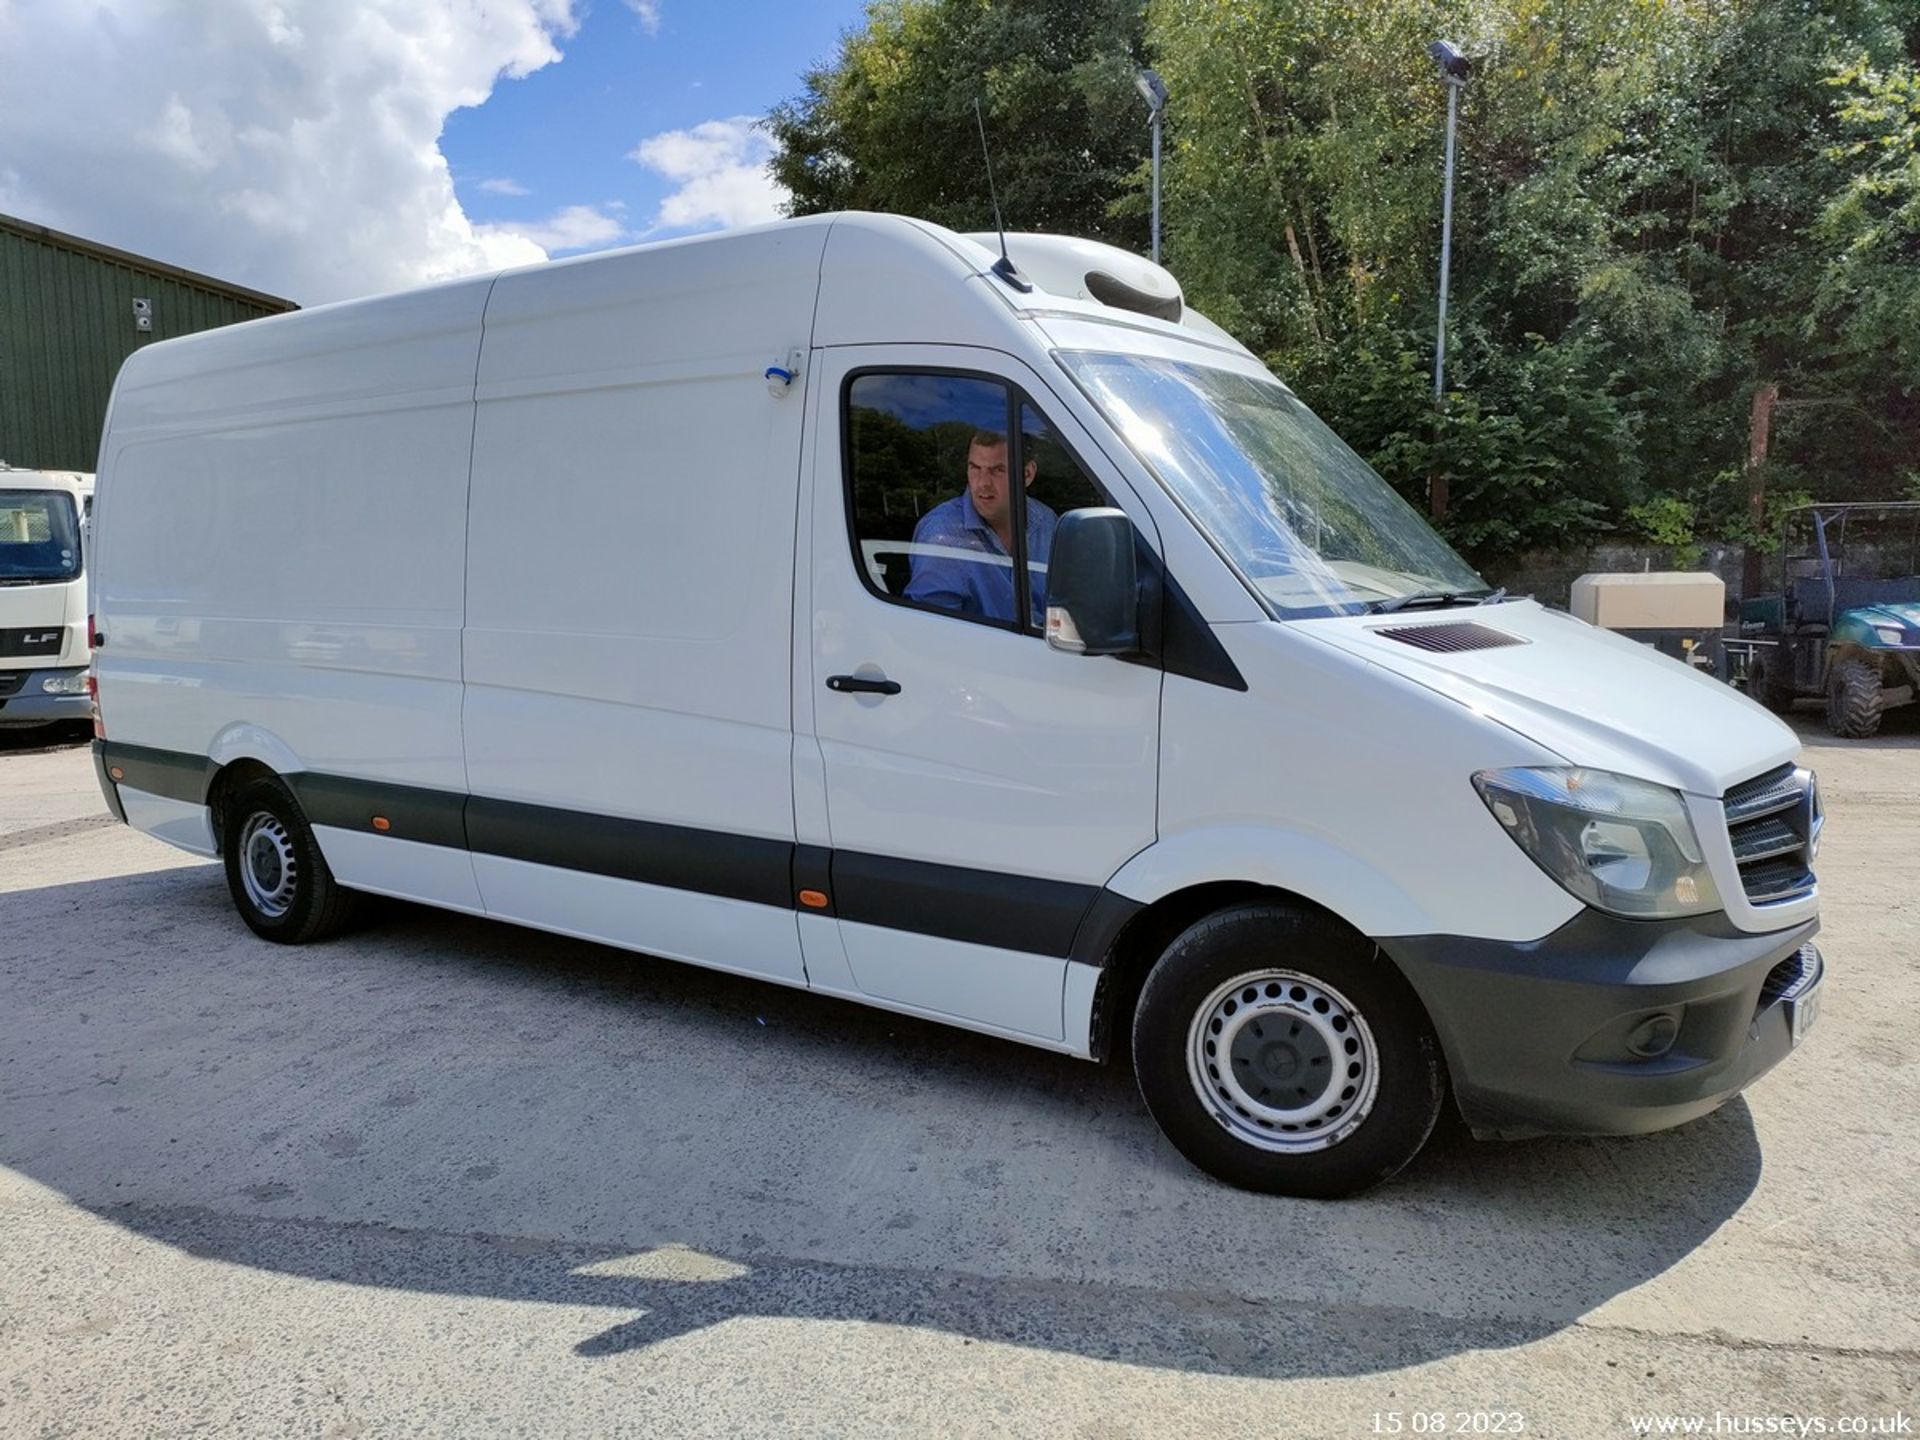 18/68 MERCEDES-BENZ SPRINTER 314CDI - 2143cc 5dr Refrigerated (White) - Image 11 of 40